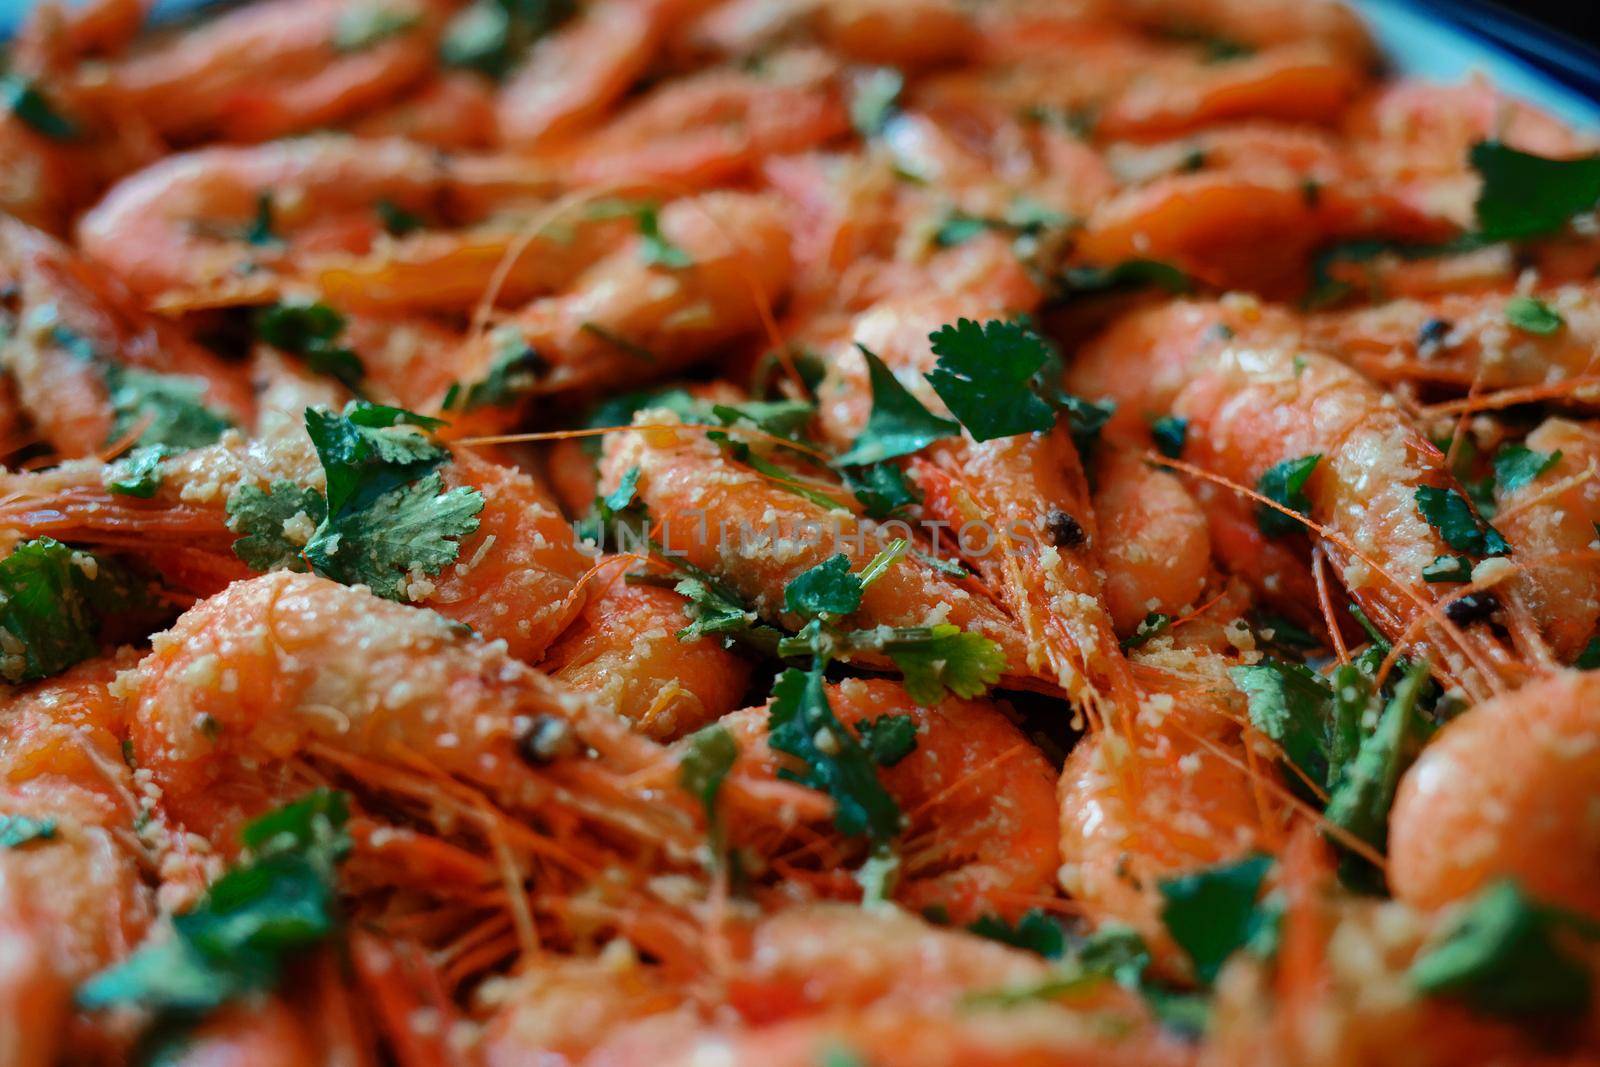 Fresh boiled prawns with coriander. A delicious dish of seafood. by SergeyPakulin